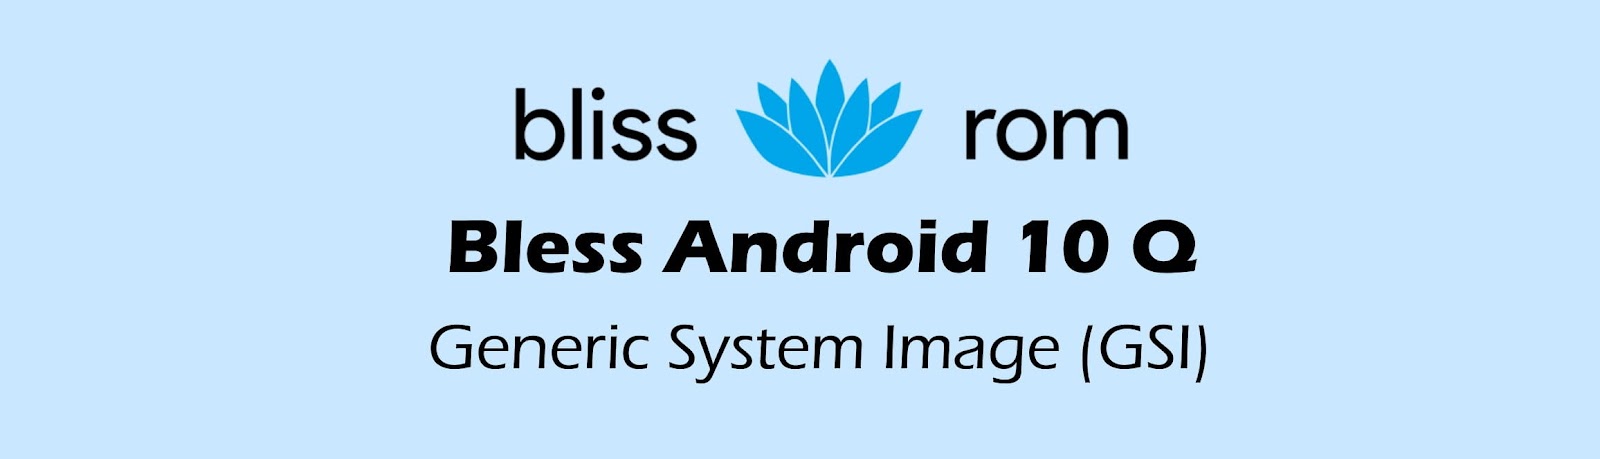 Bless Android 10 Q GSI Download + Review